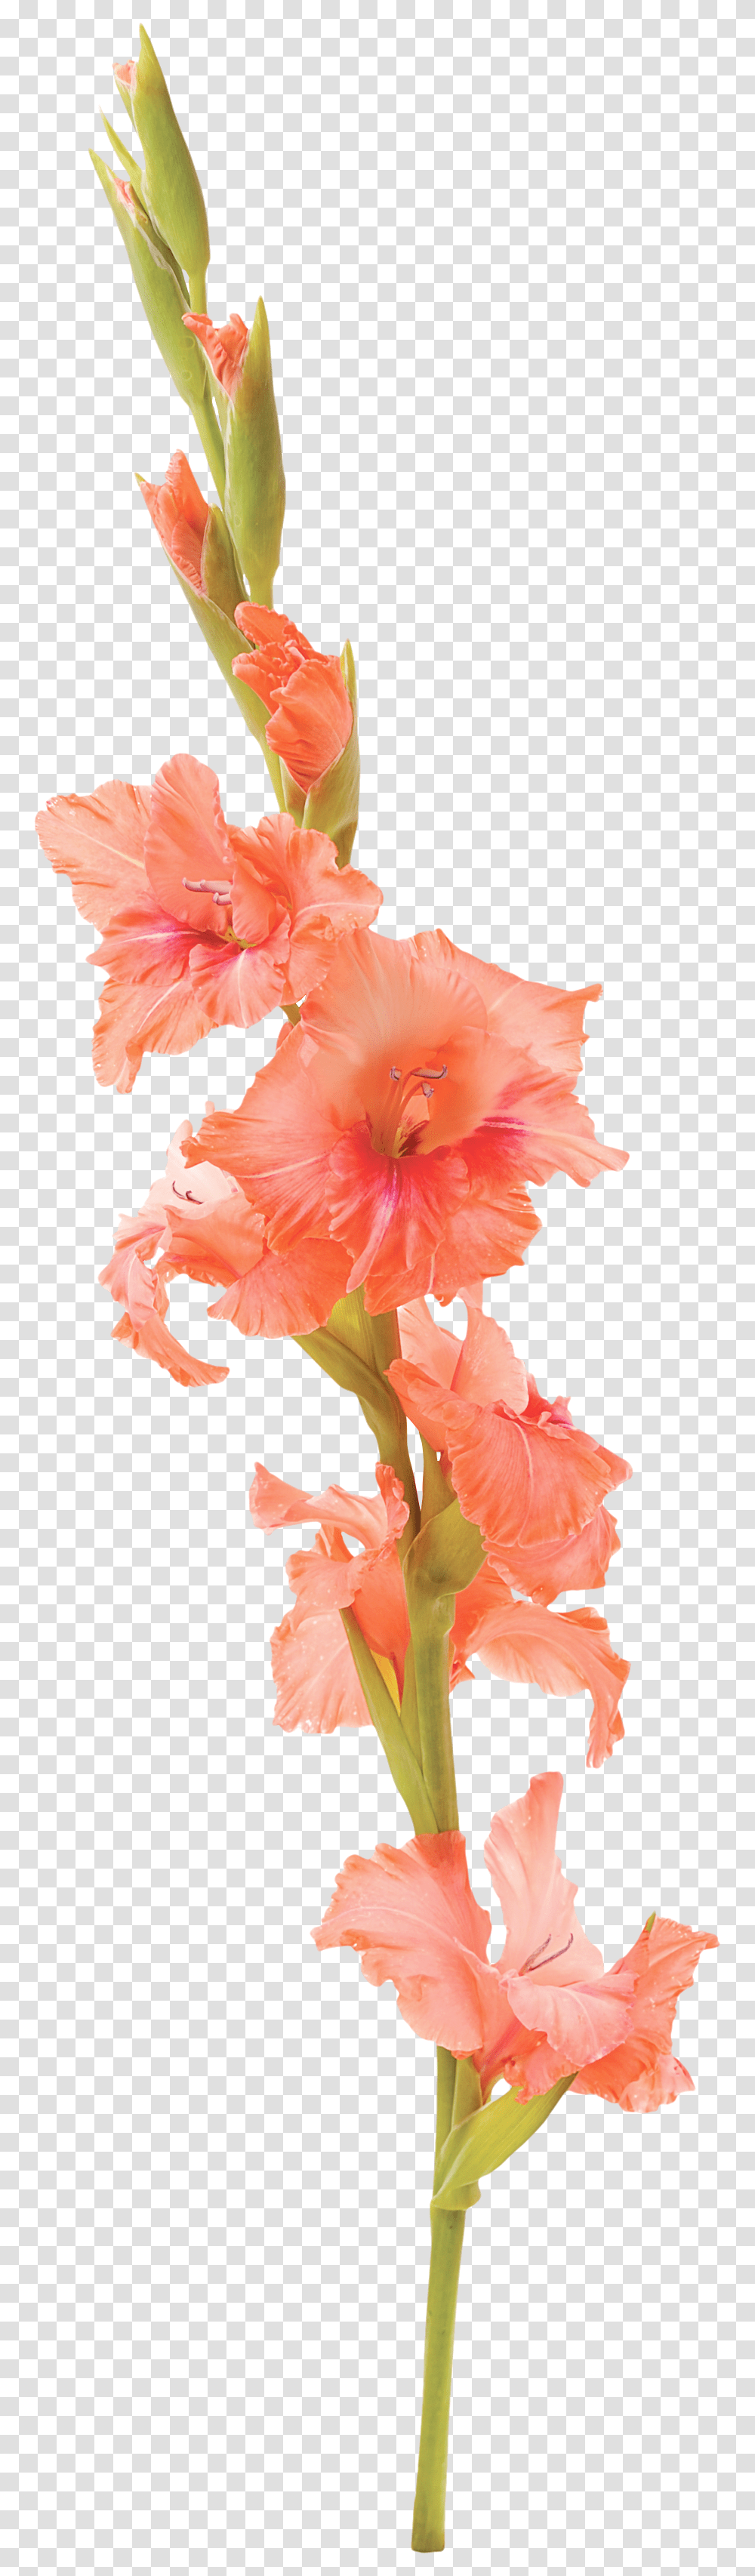 Clip Art Gladiolus Flower Tattoo Watercolor Gladiolus Flower Tattoo, Plant, Blossom, Hibiscus, Amaryllis Transparent Png